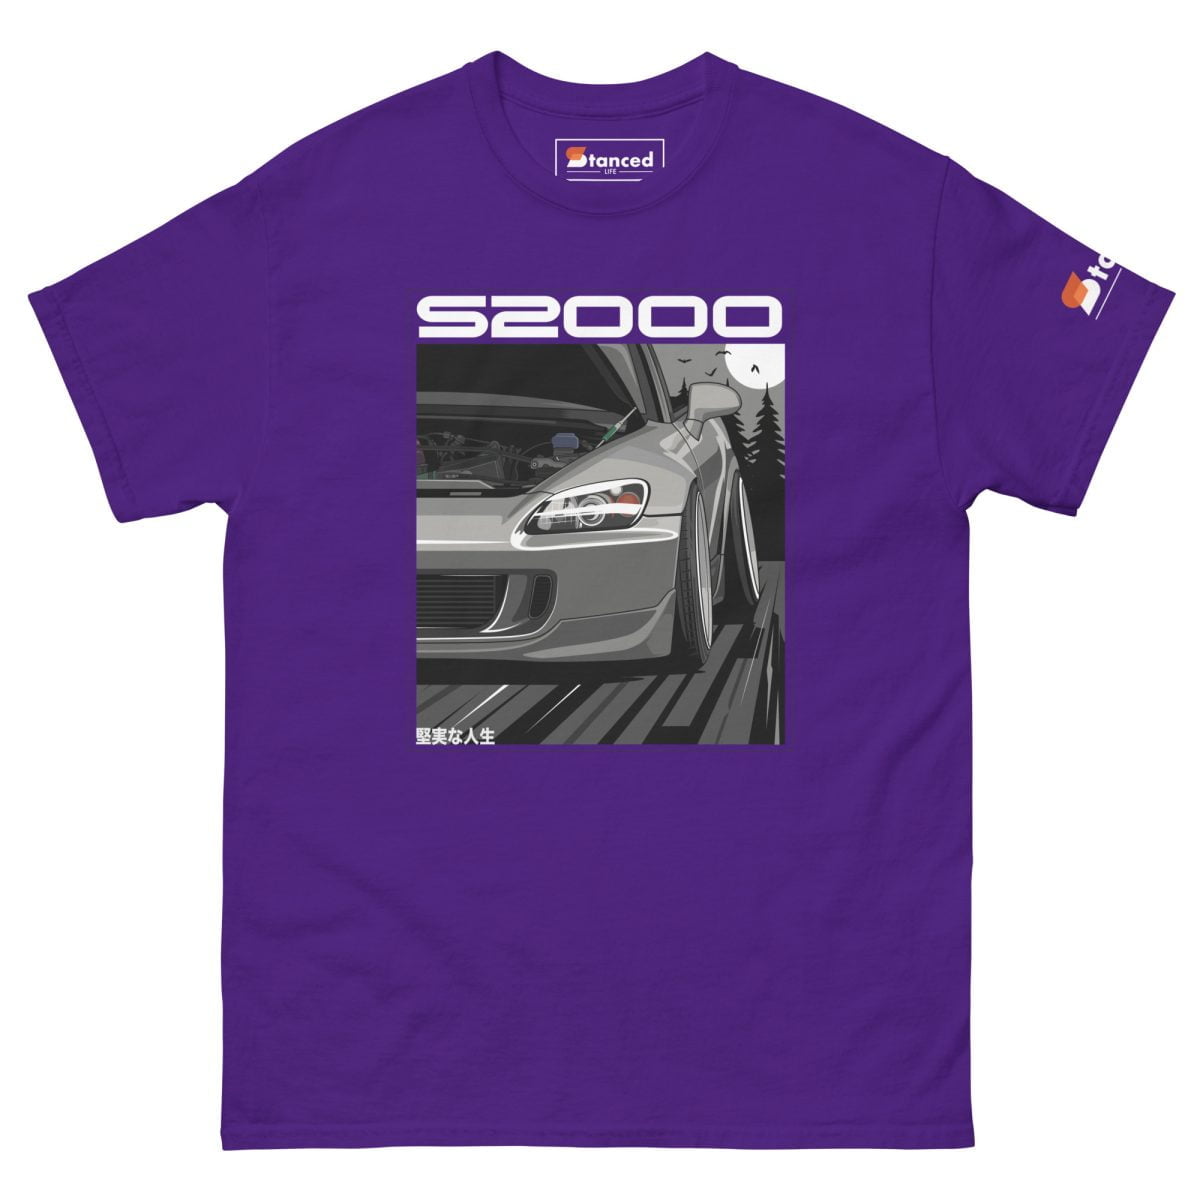 A purple Honda S2000 Mens Graphic T shirt featuring the iconic S2000 design | StancedLife